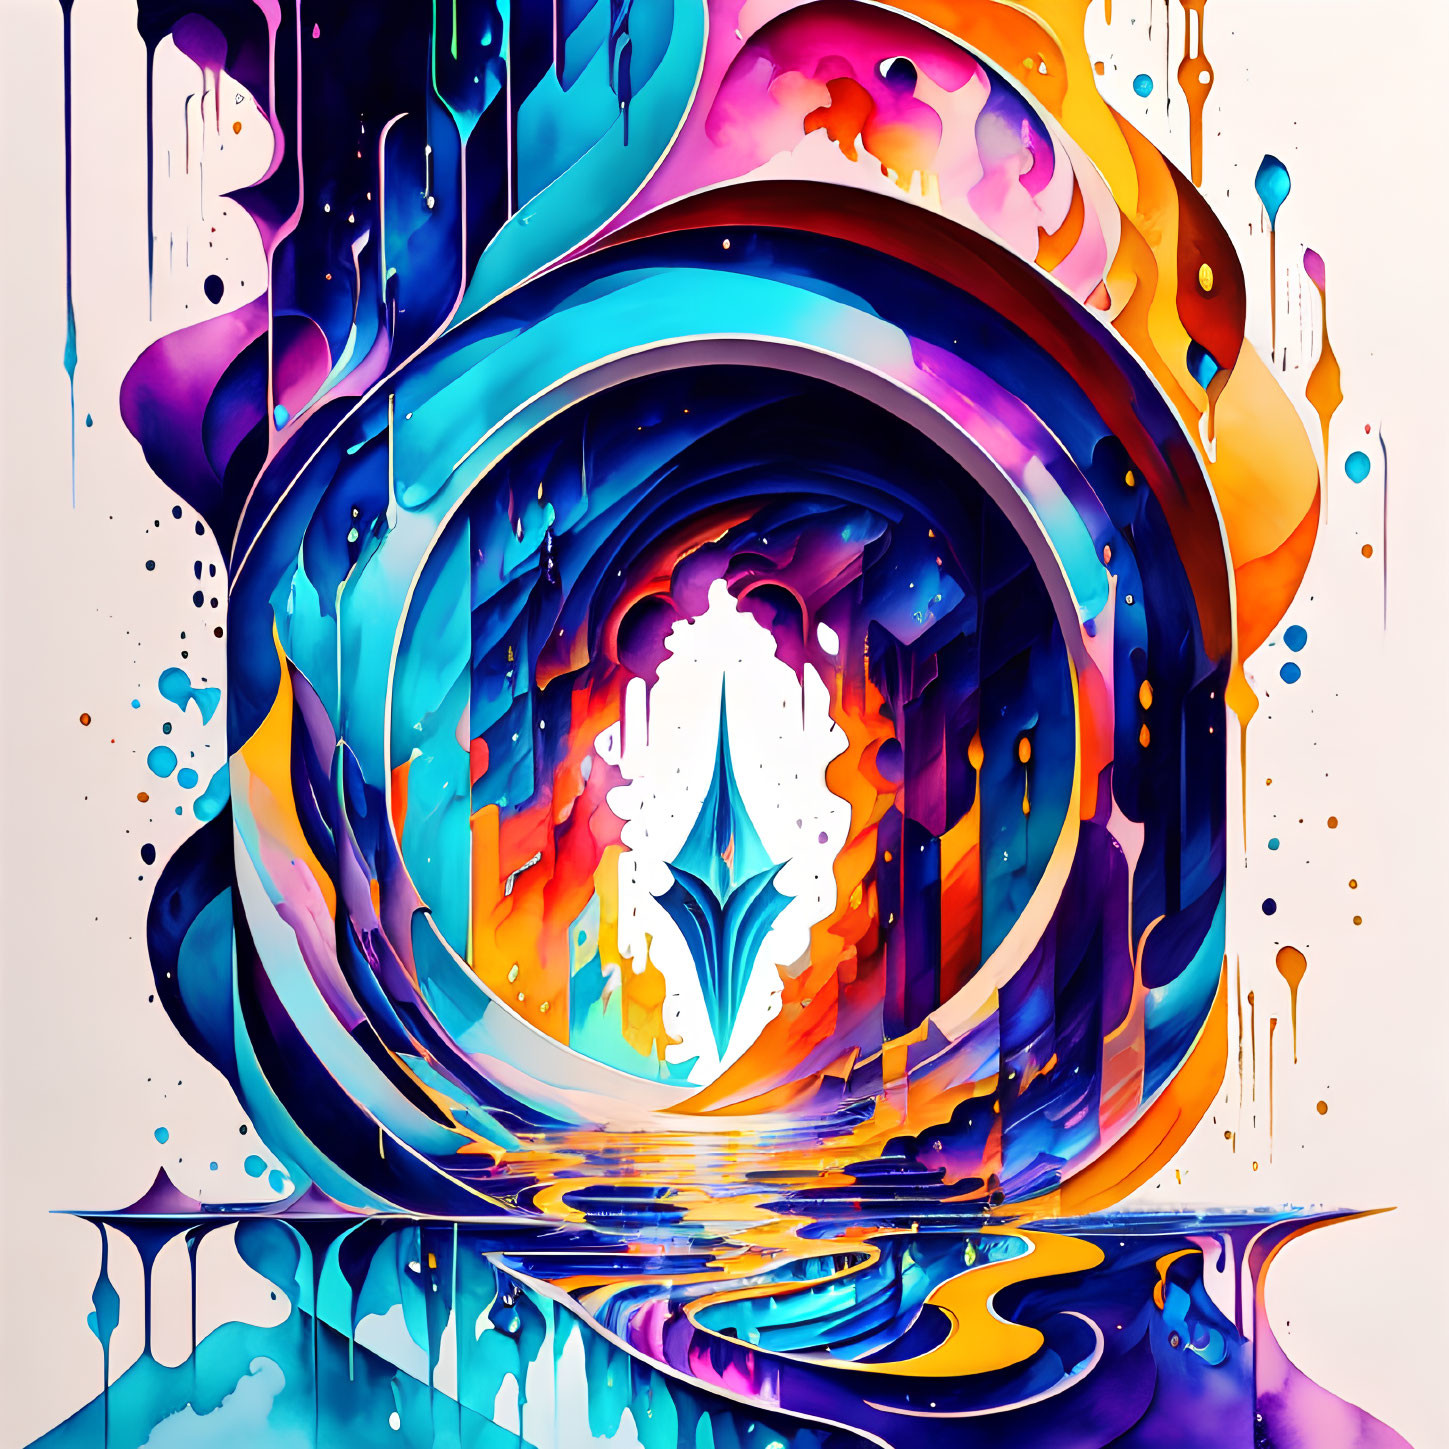 Colorful Abstract Painting: Swirling Blues, Purples, and Oranges with Reflective Water